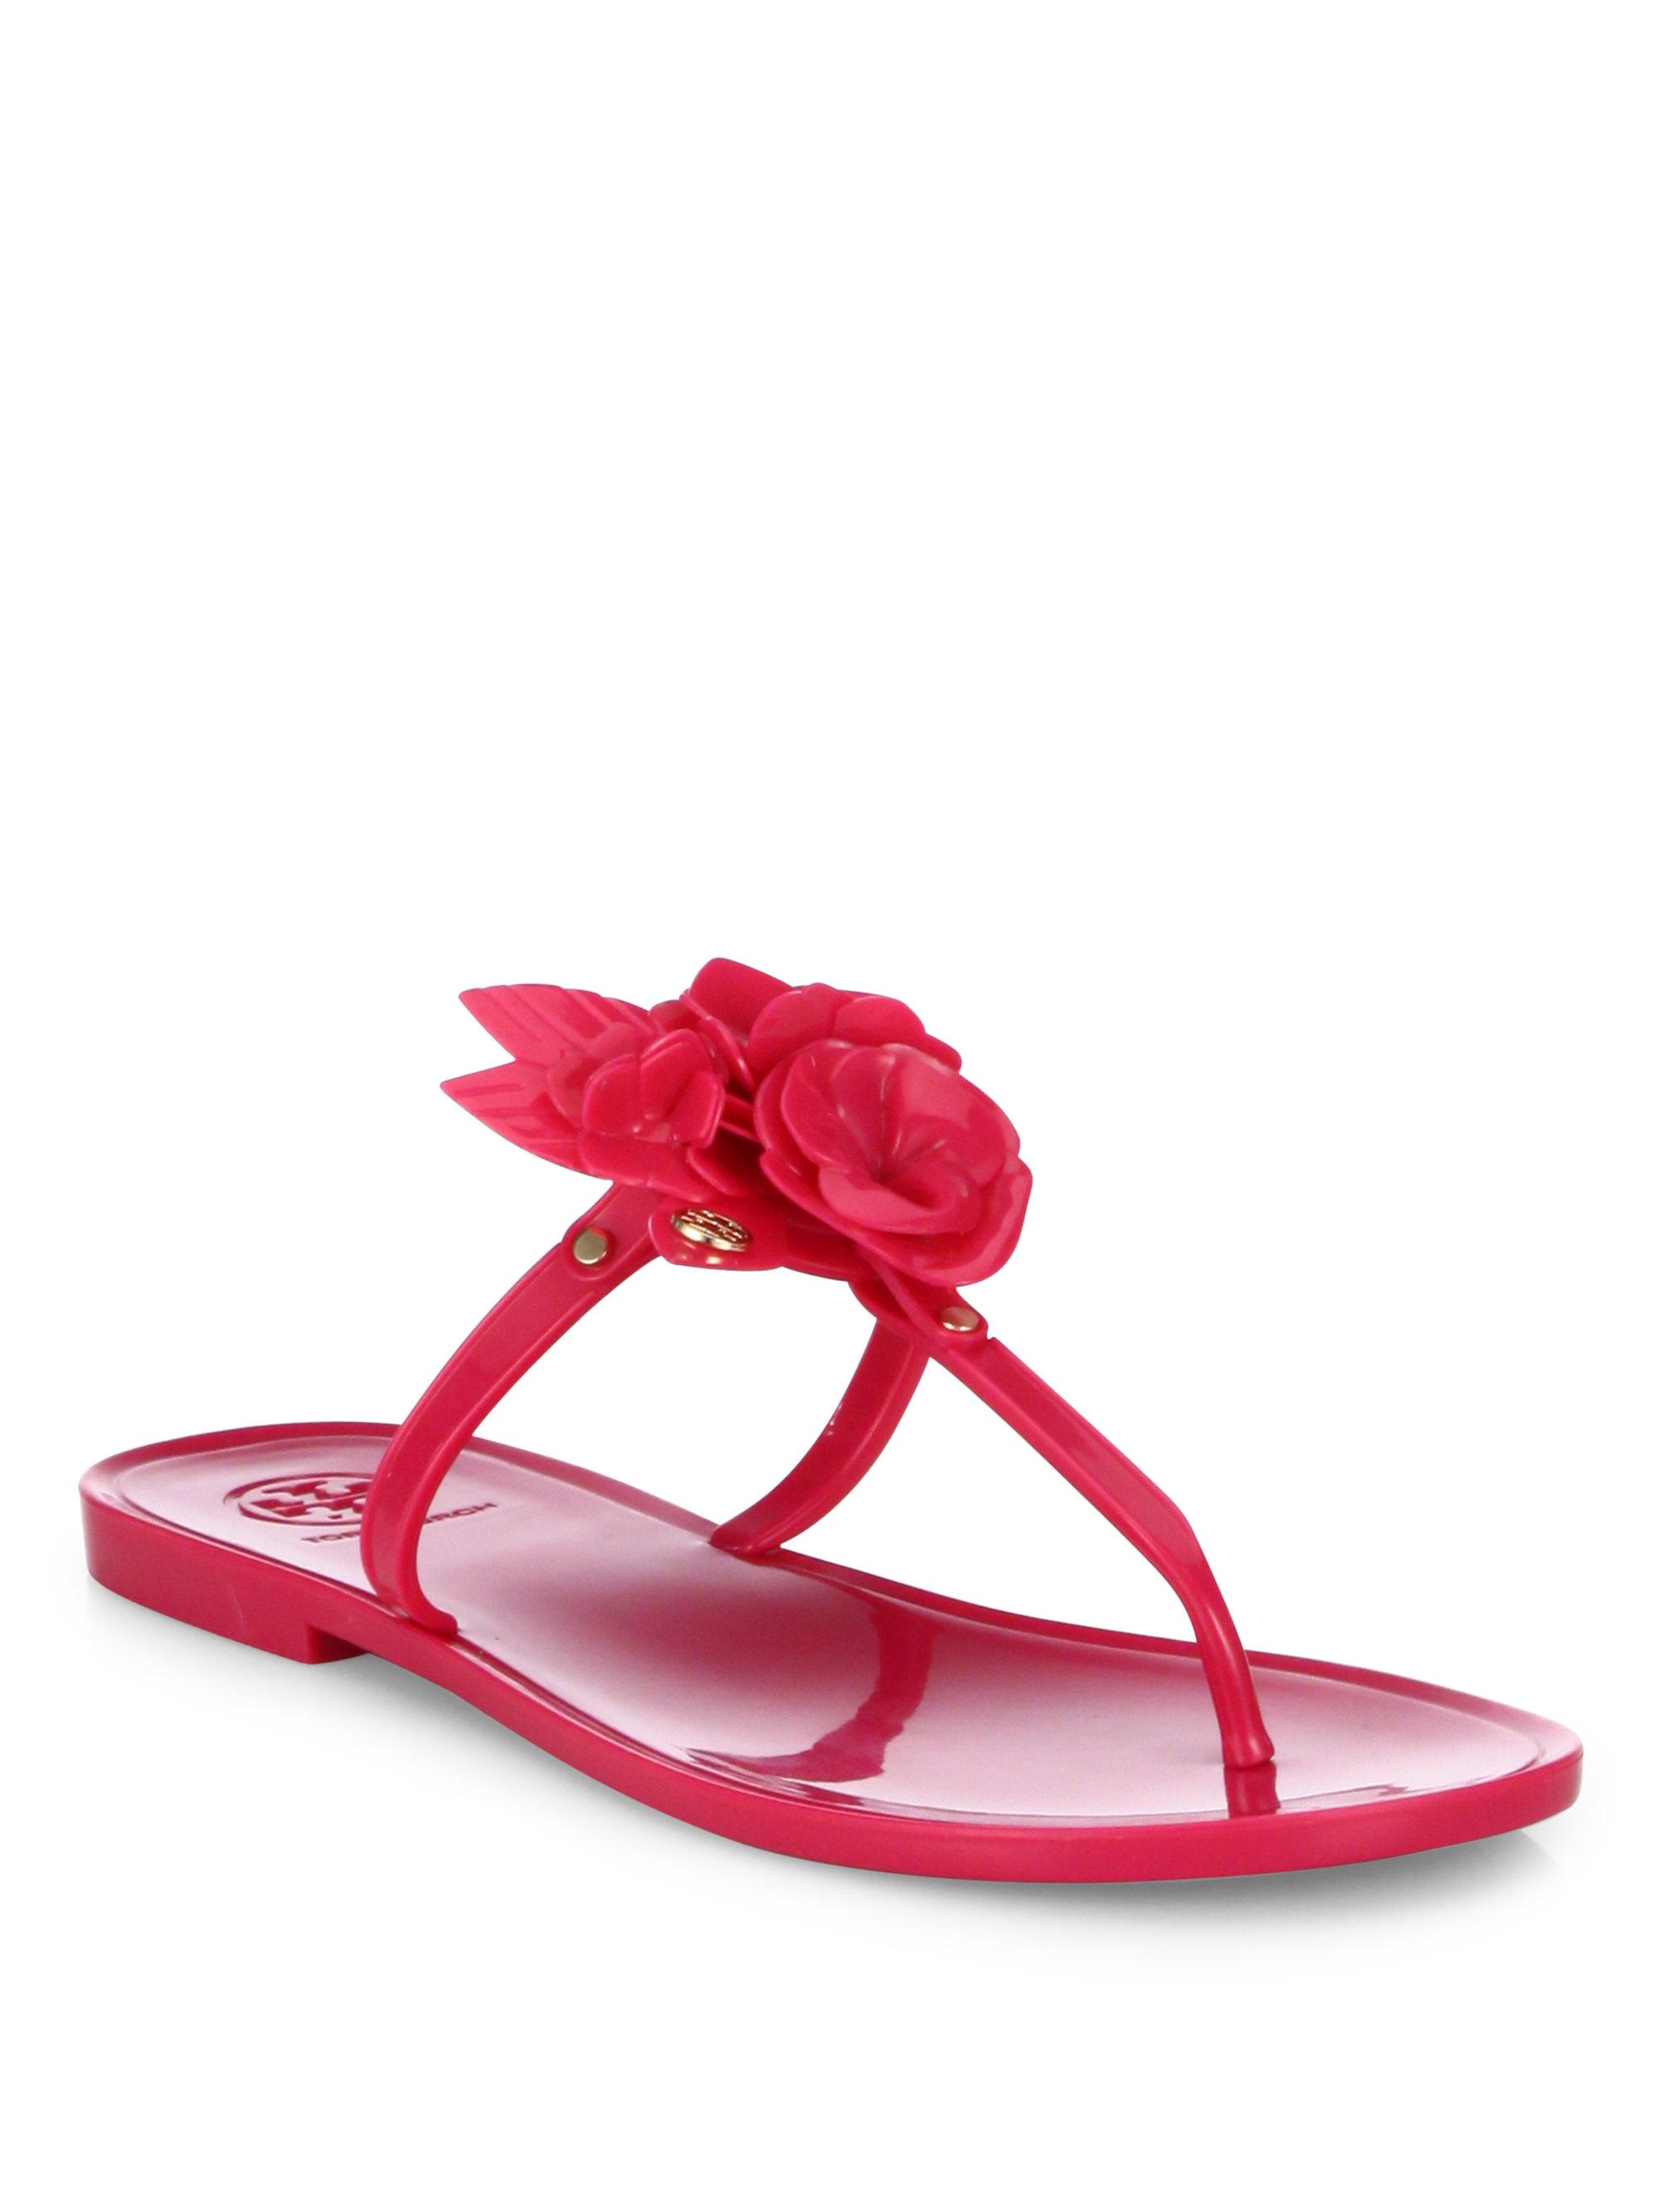 Tory Burch Blossom Jelly Thong Sandals in Pink | Lyst